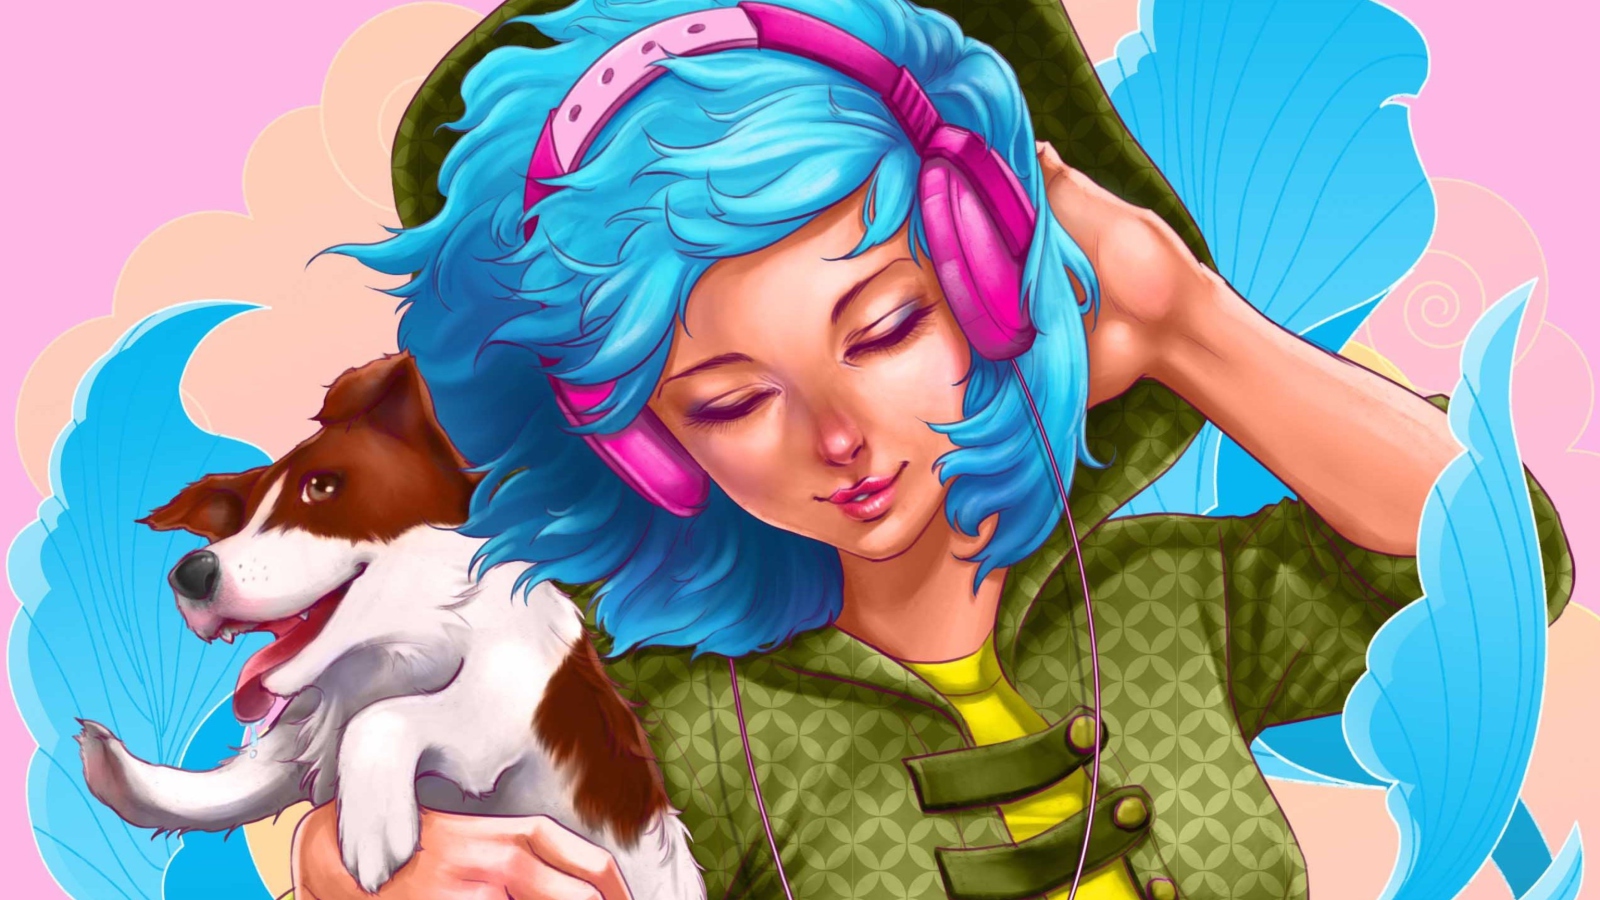 Girl With Blue Hair And Pink Headphones Drawing screenshot #1 1600x900